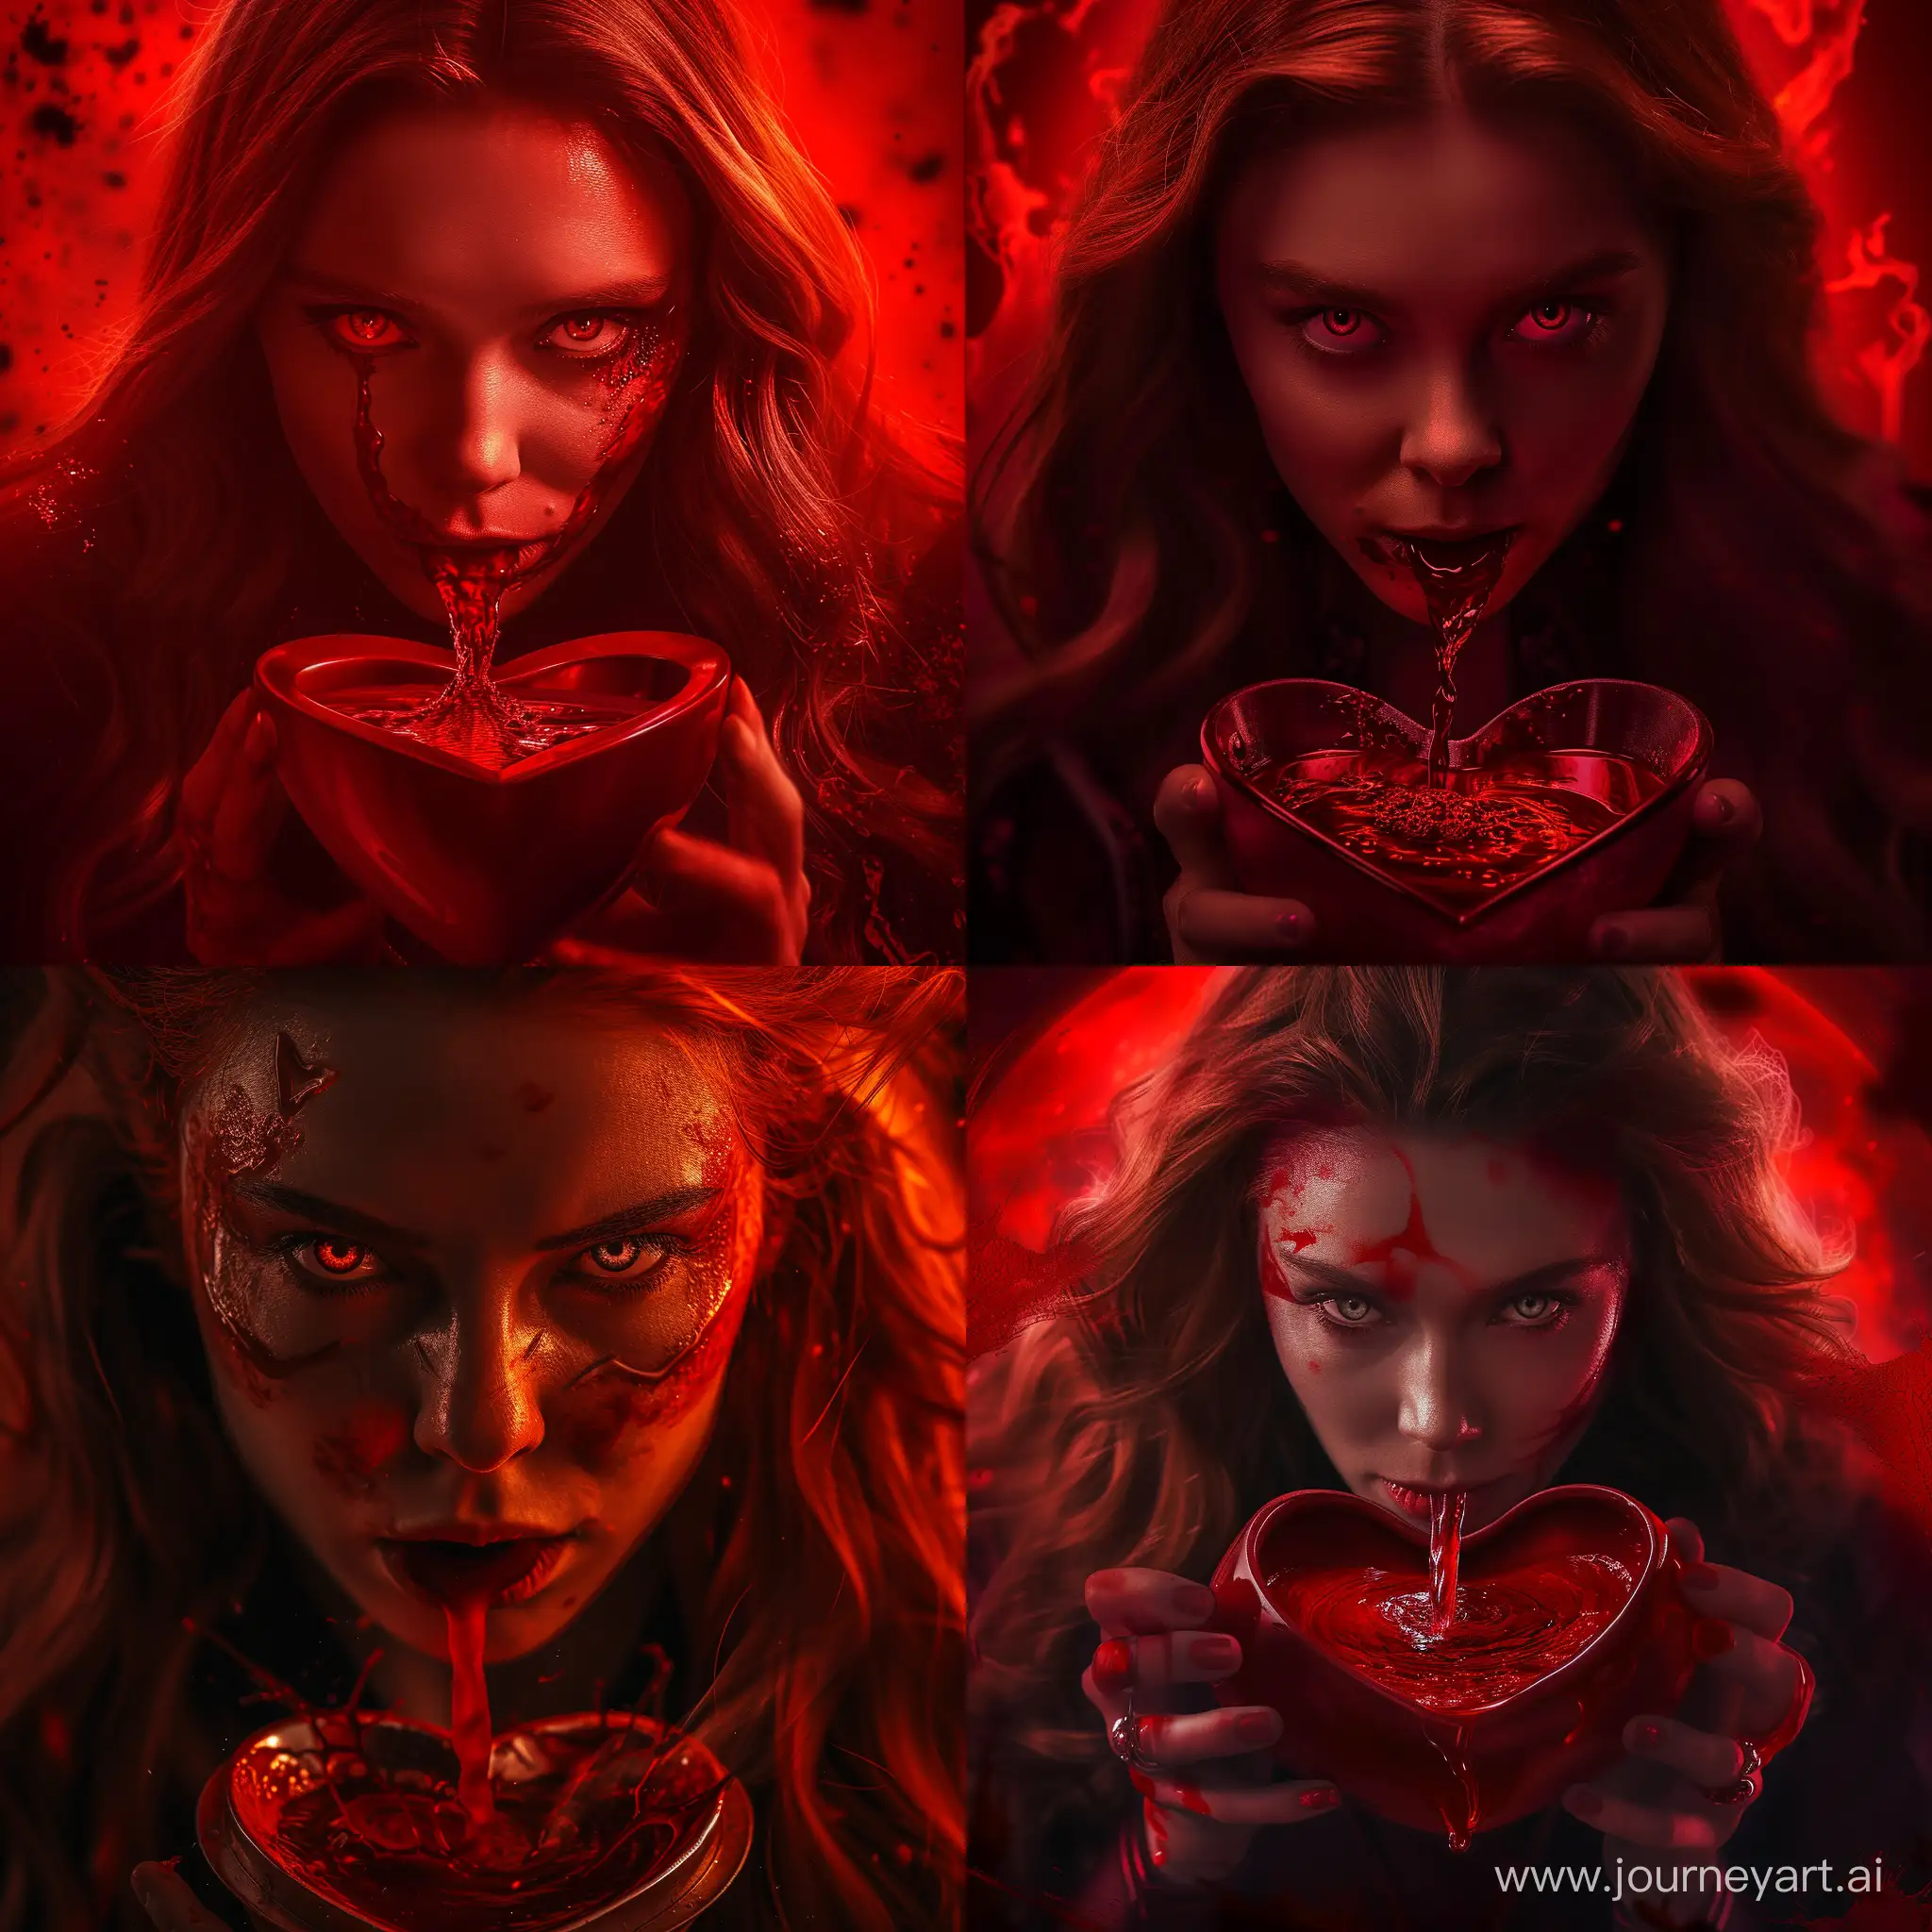 Scarlett-Witch-Drinking-Blood-from-Heartshaped-Bowl-in-Cinematic-Style